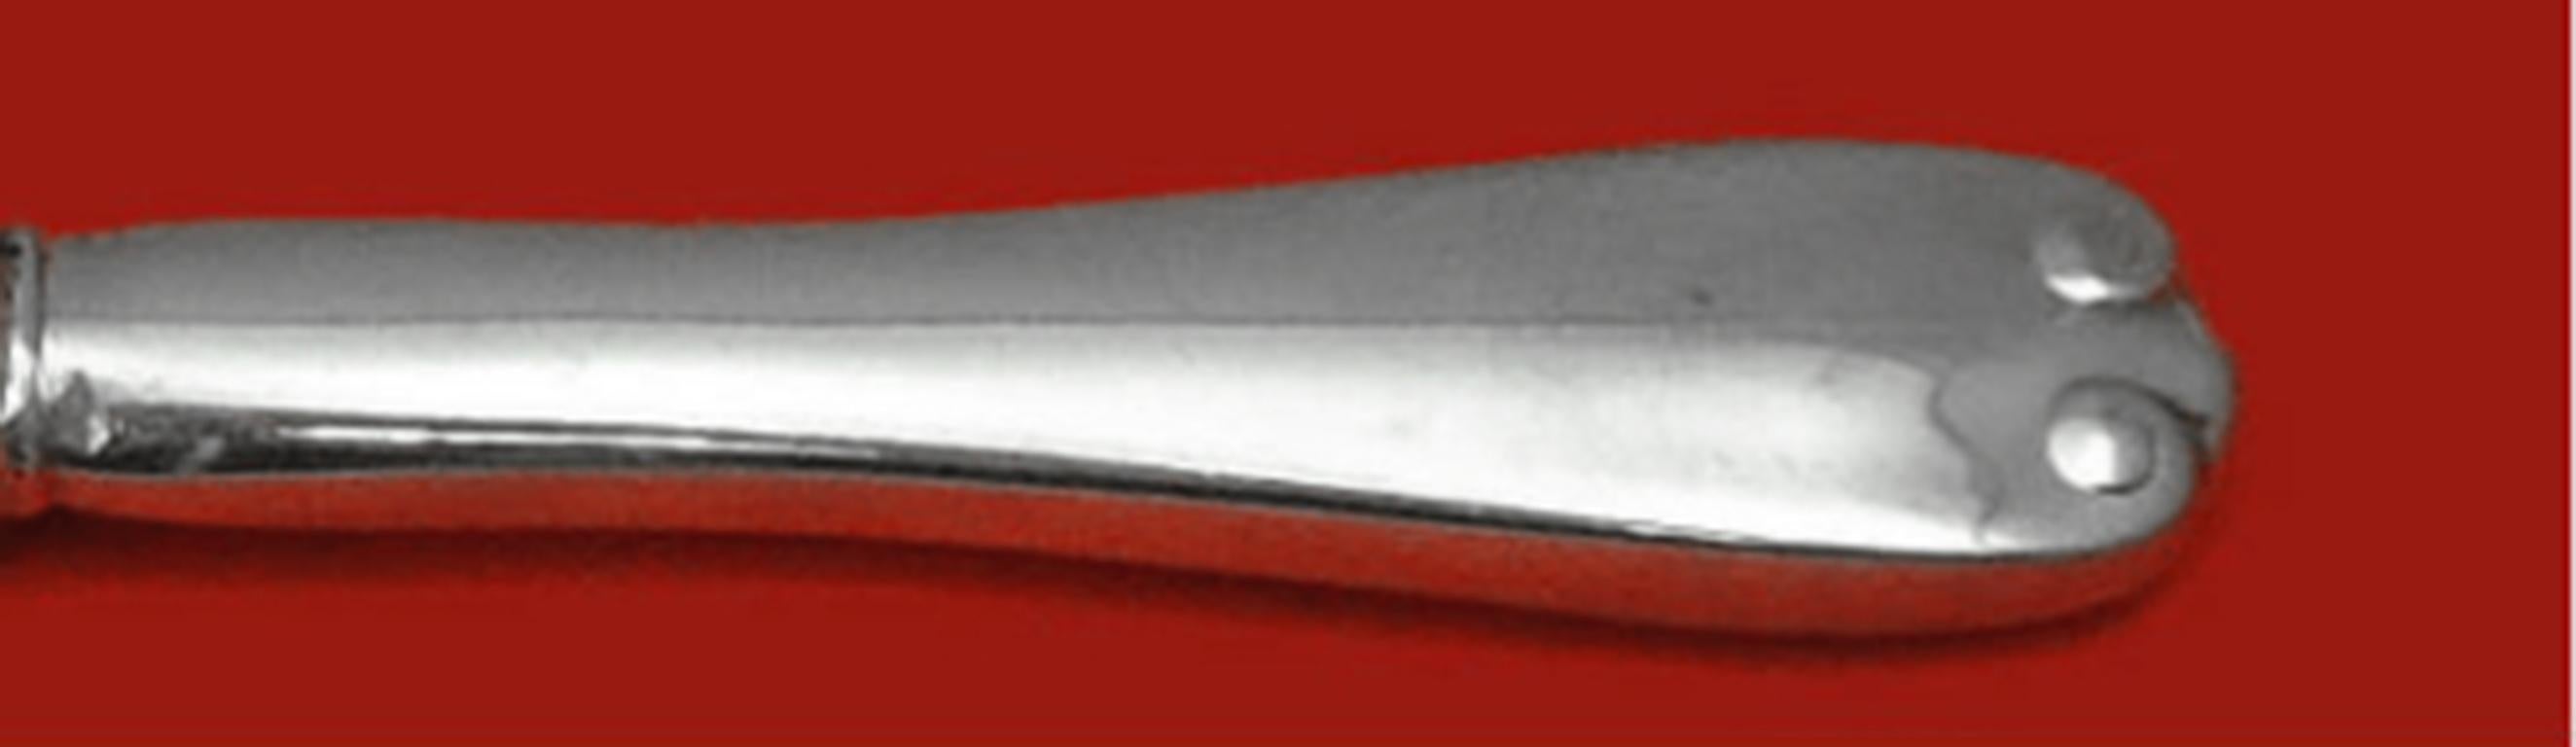 Sterling silver hollow handle with stainless blade dinner knife, French 10 1/8